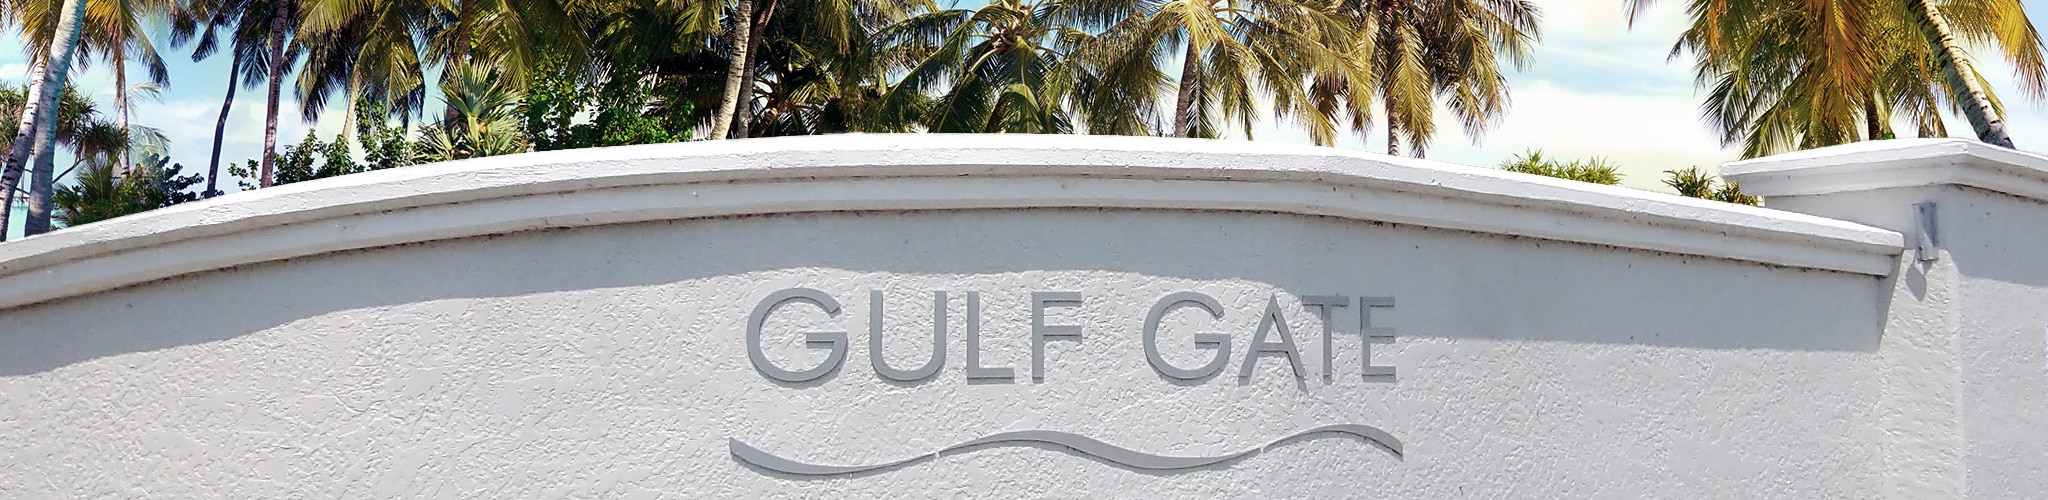 Gulf Gate Wall With Sky In The Background